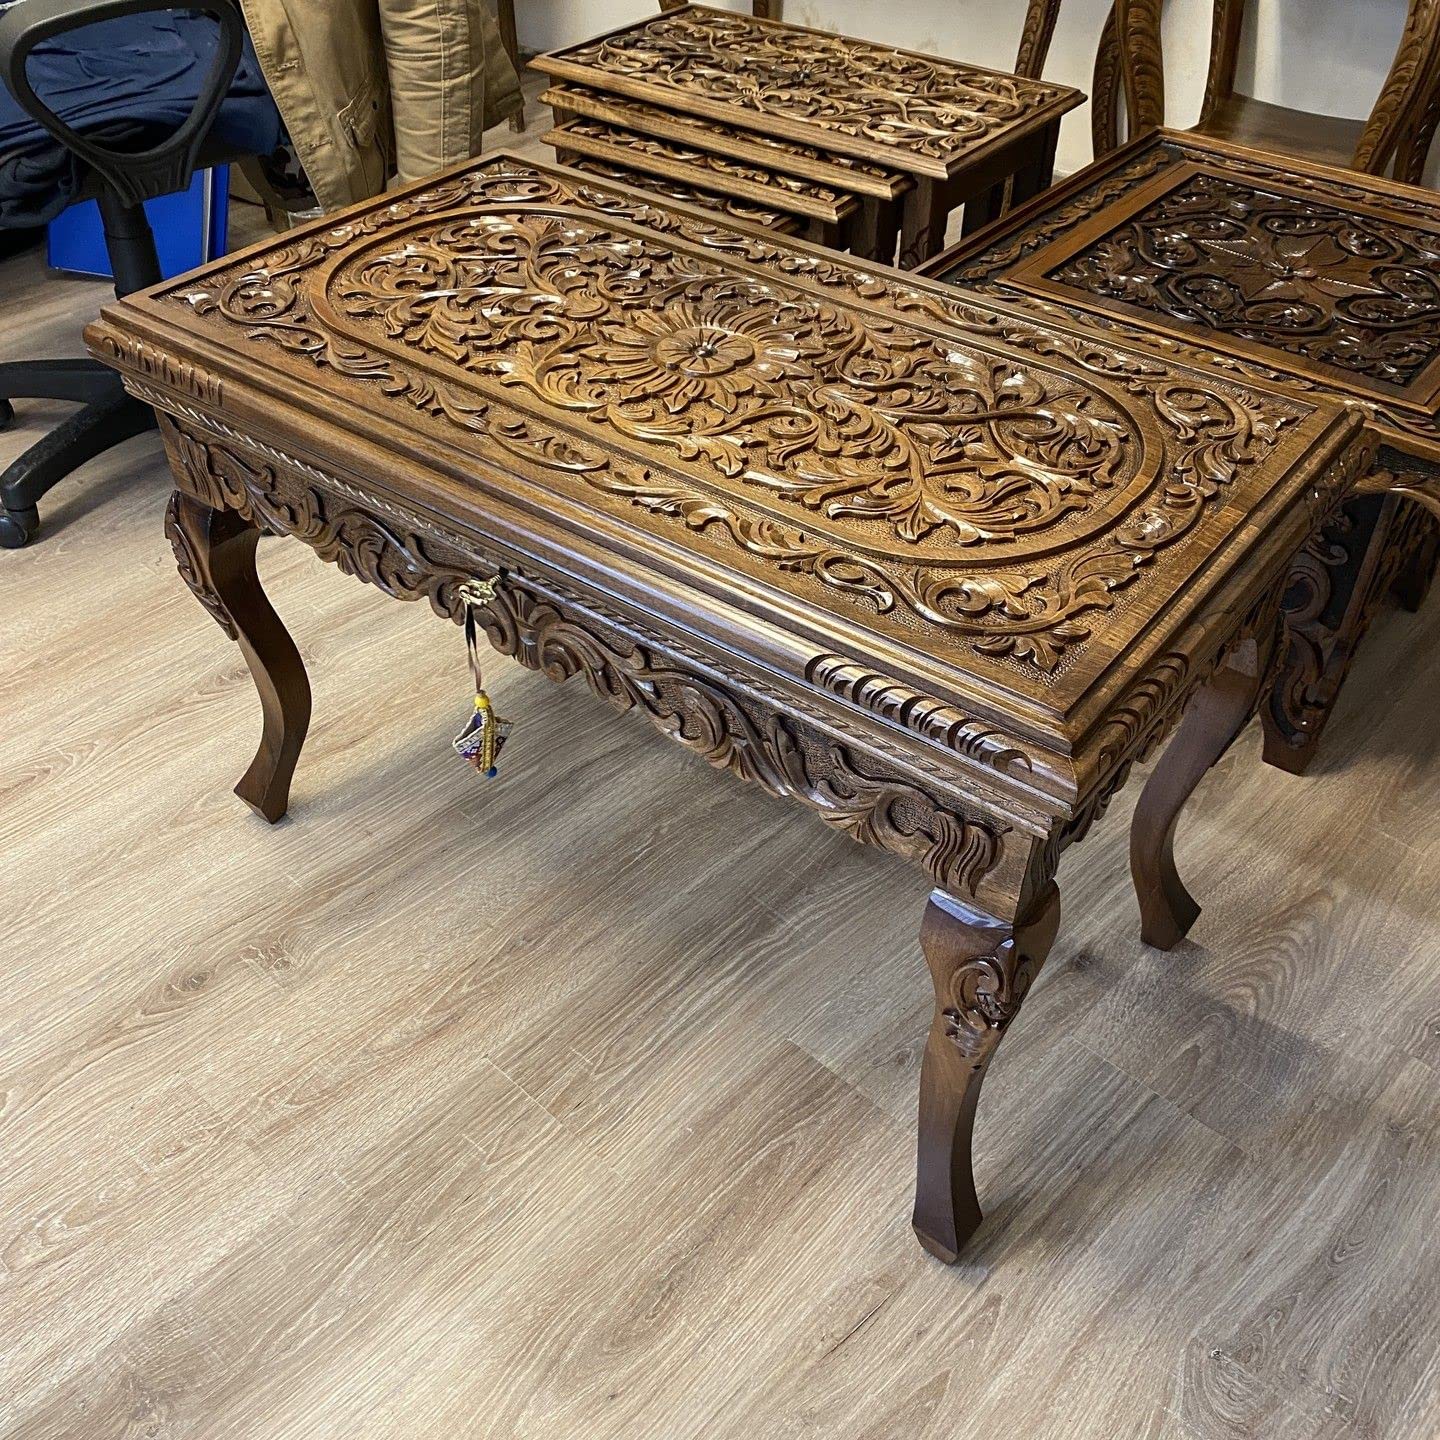 Detailed carving on walnut wood table